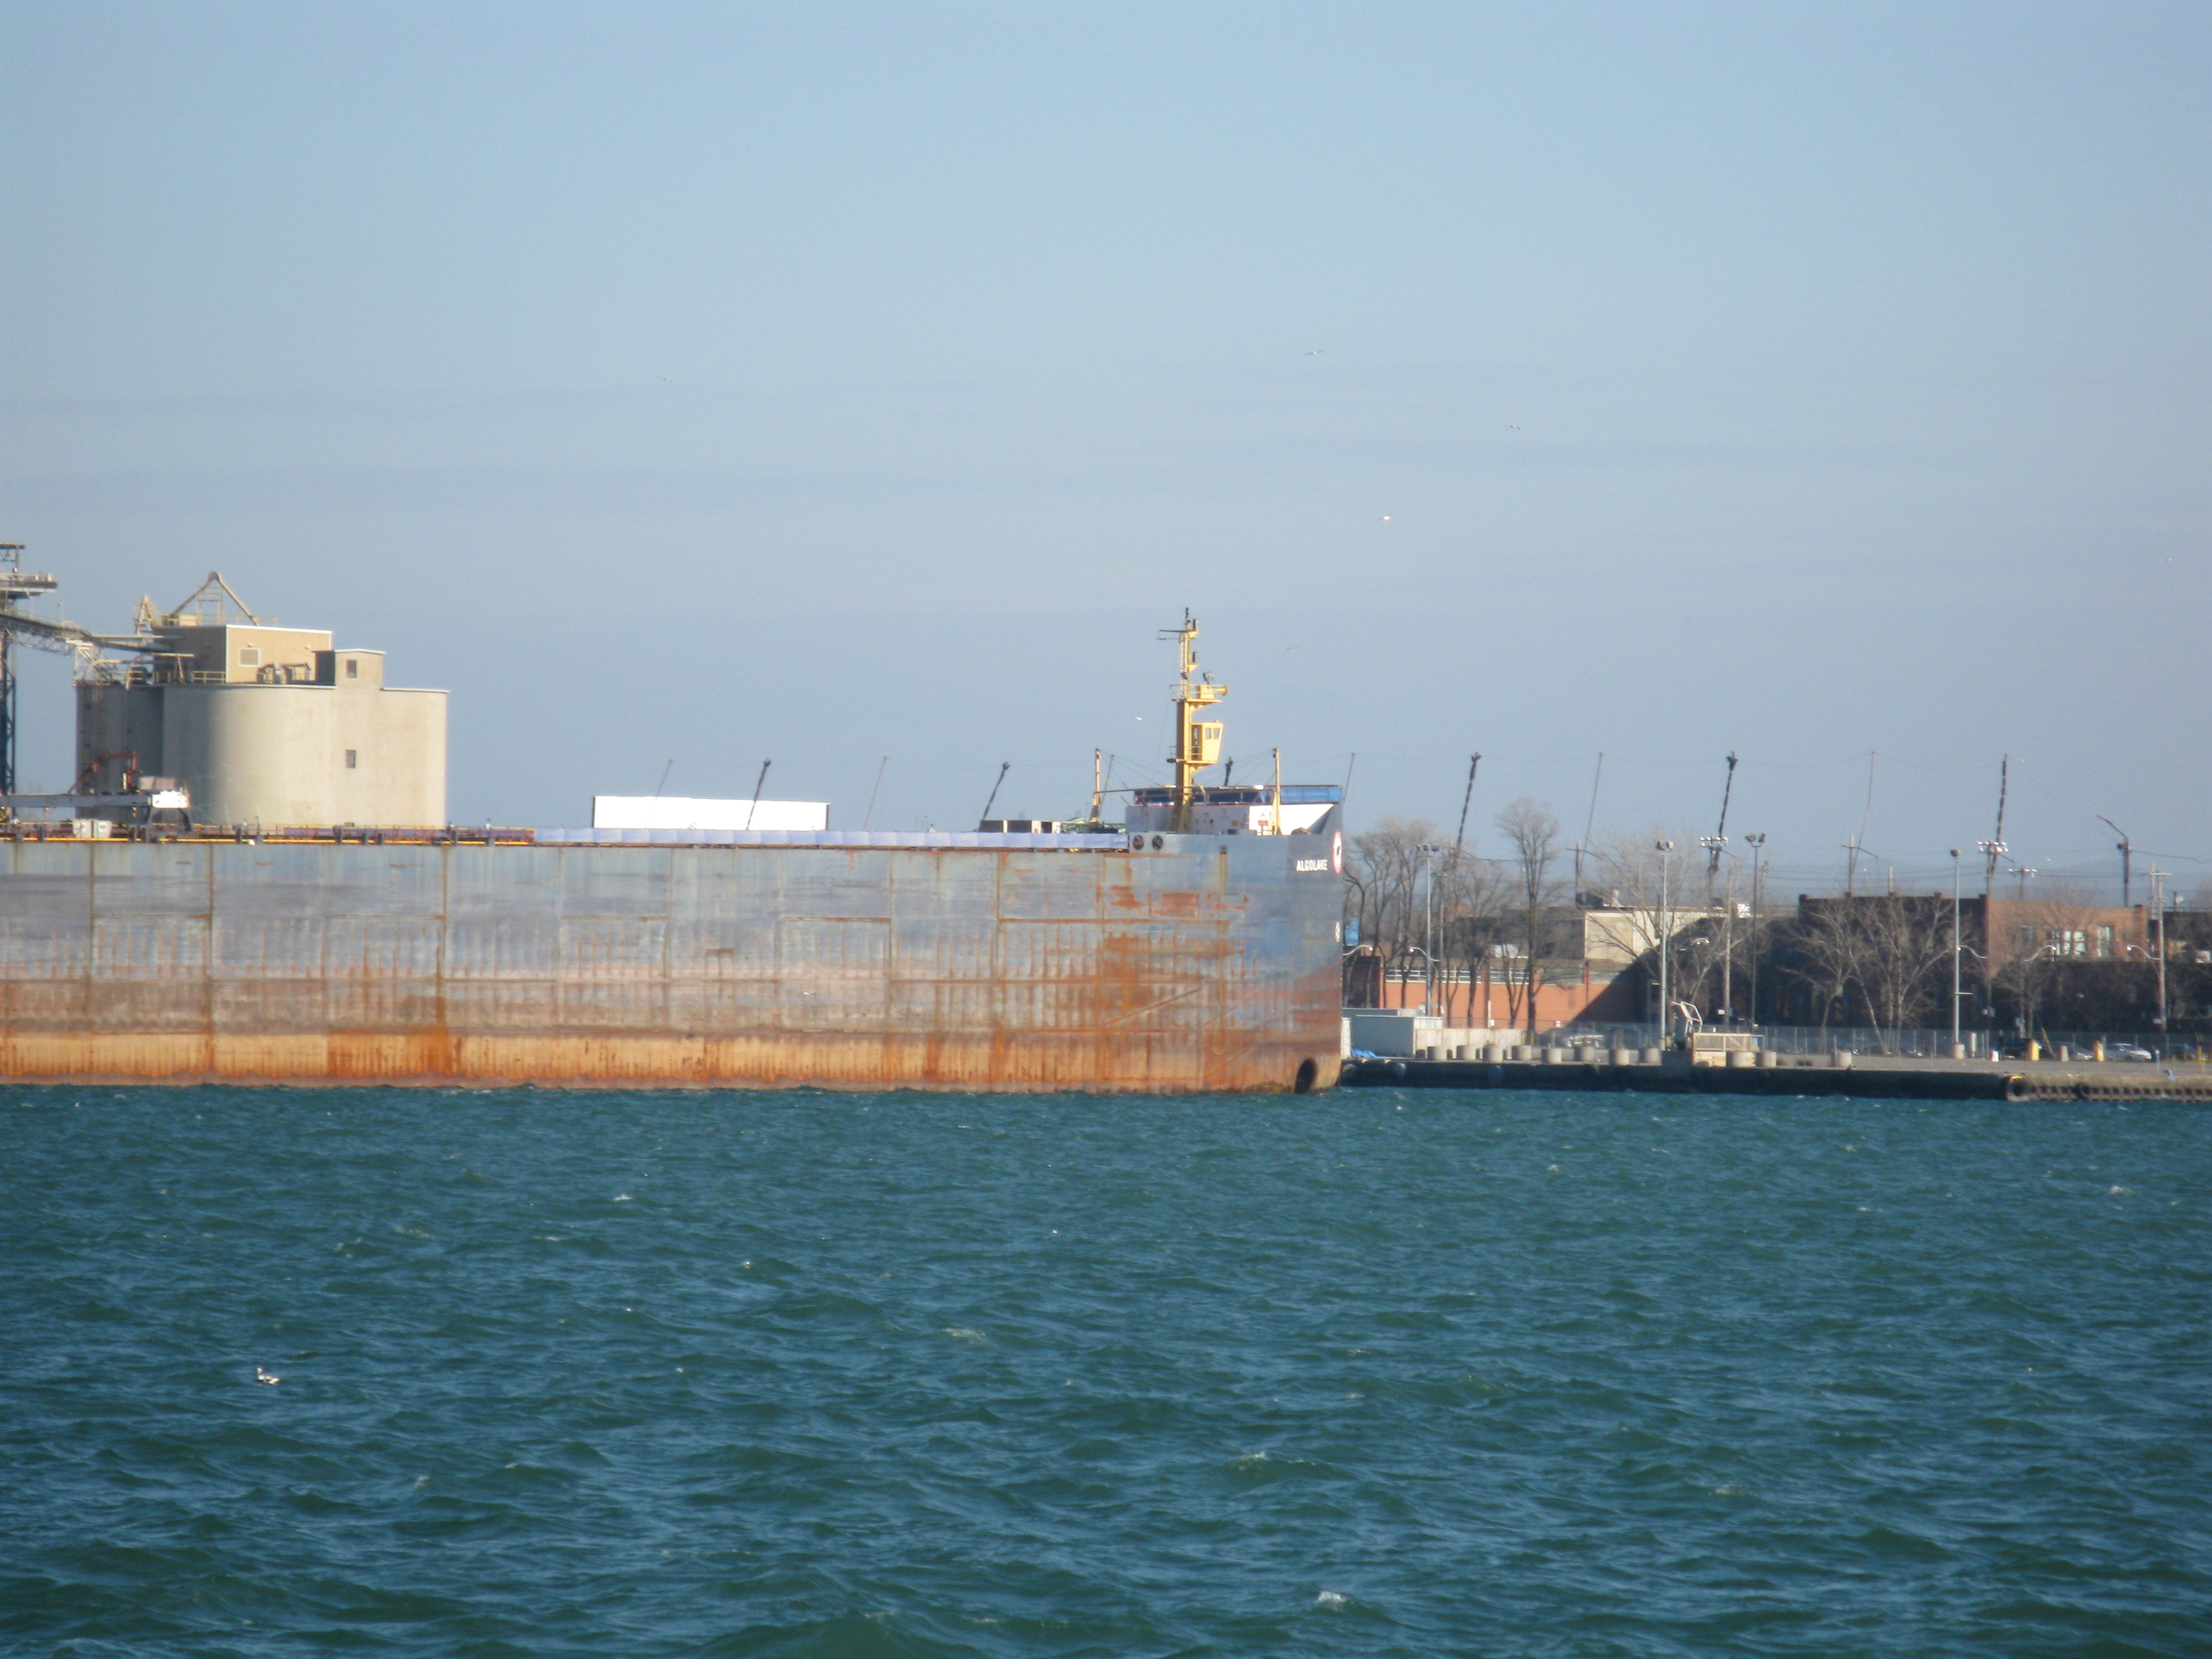 Lake freighter algolake, moored in toronto, 2013 01 16 -d photo